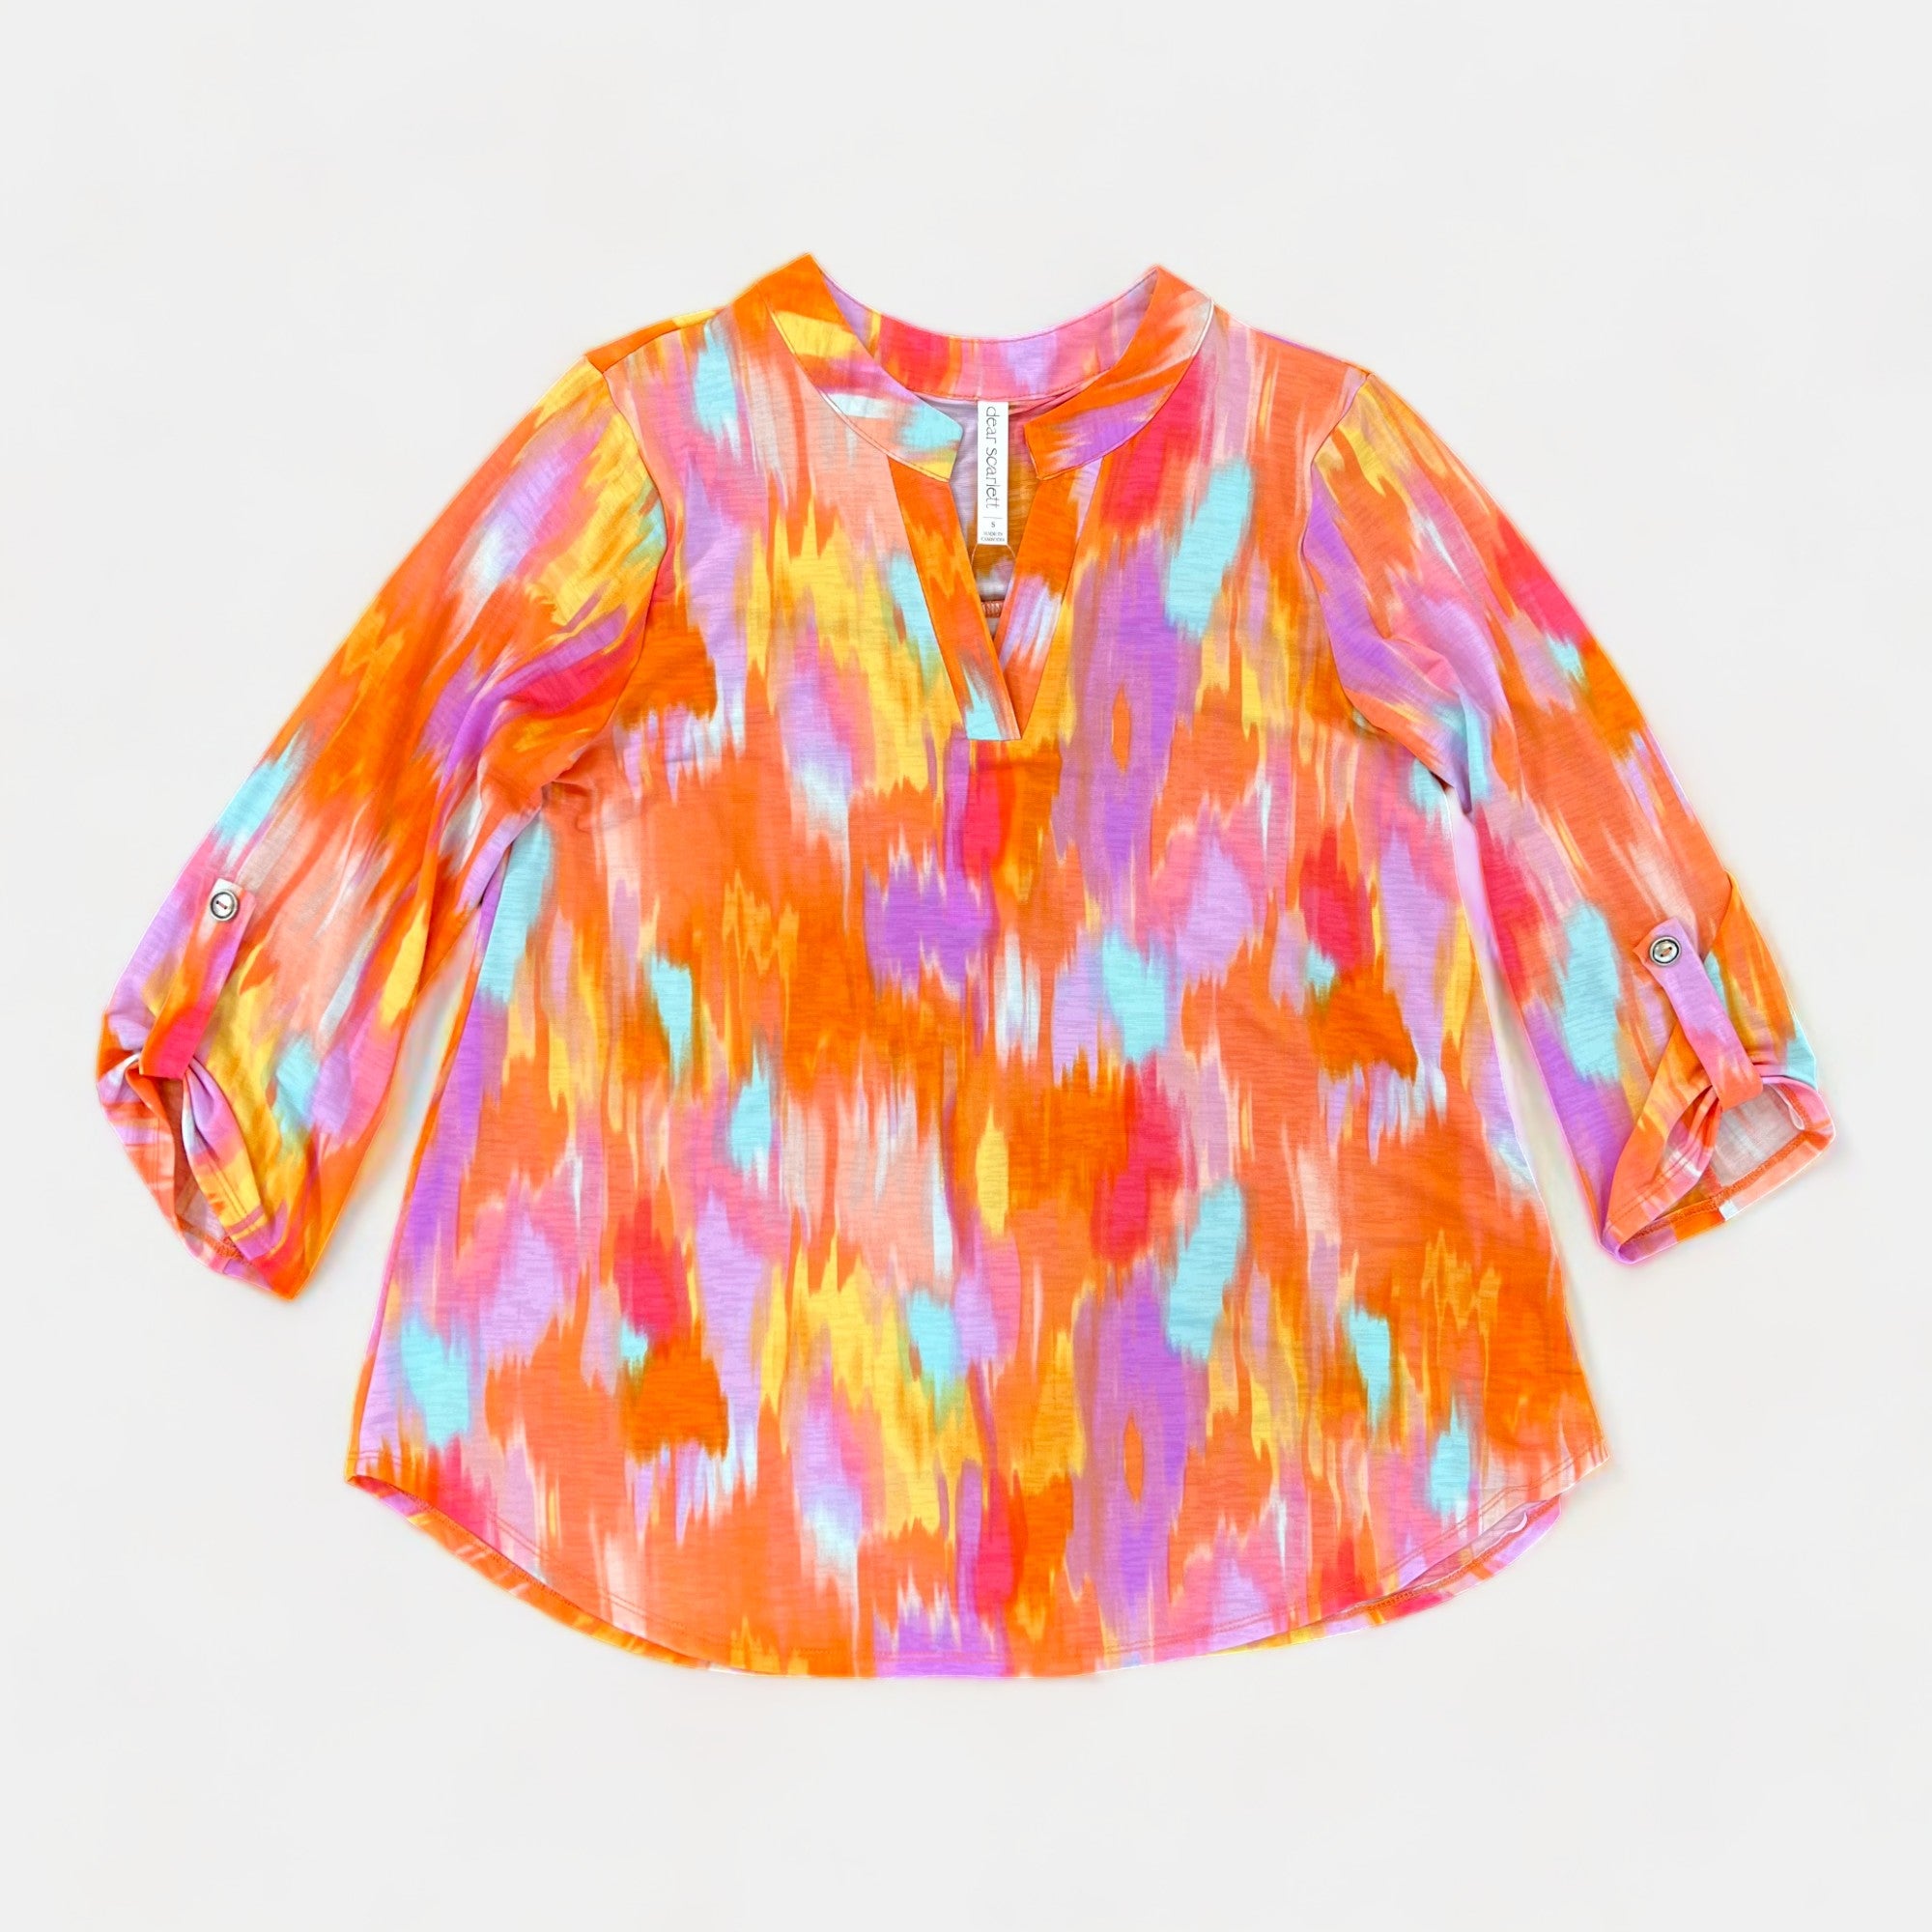 Apricot Watercolor Lizzy Top